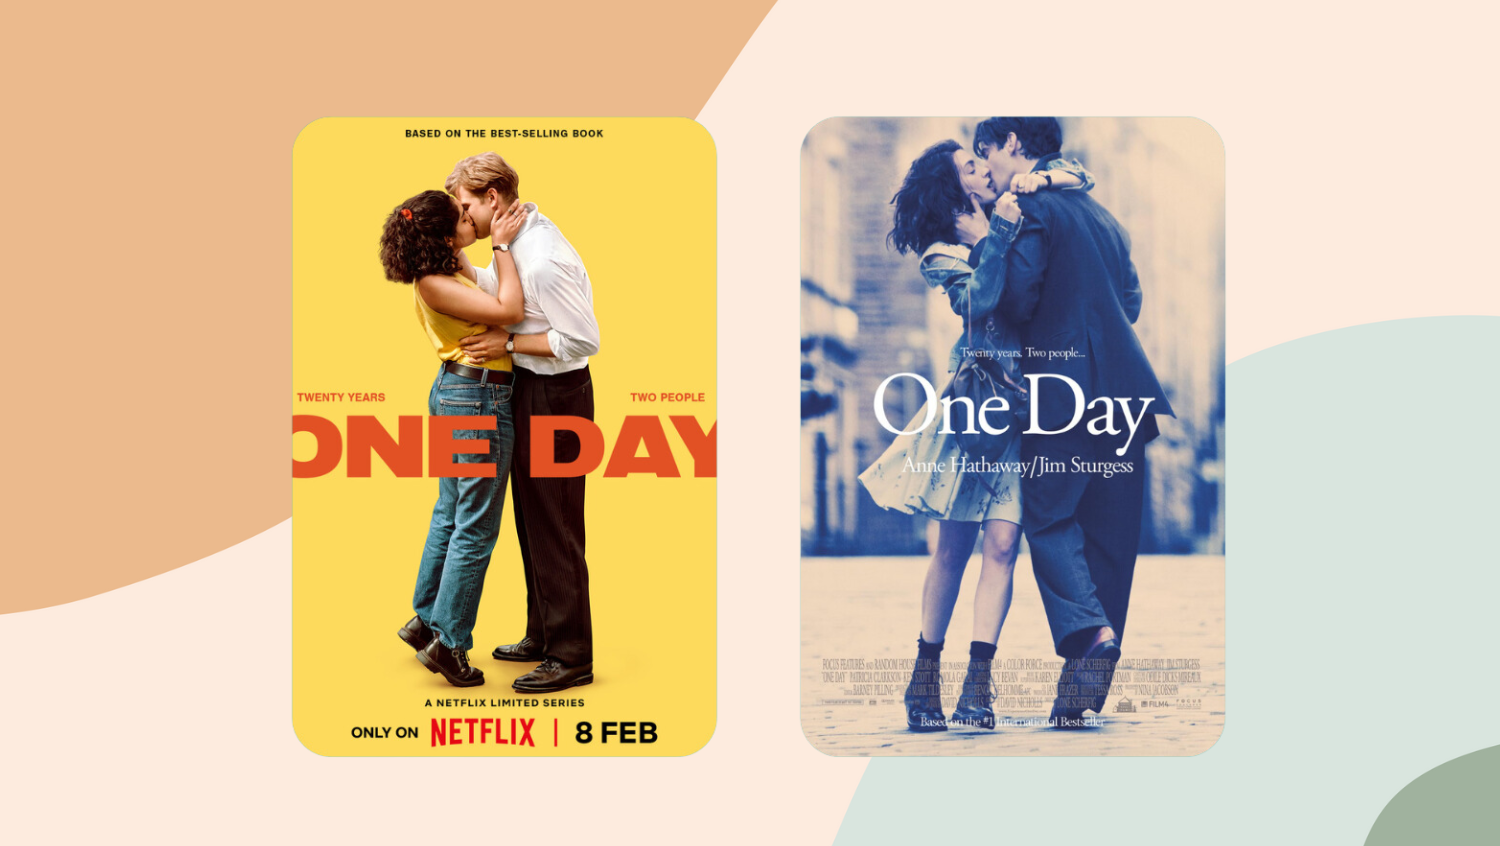 Sharp Plot Twists, Heartbreaks & 80's Nostalgia: Our Review of "One Day" by David Nicholls